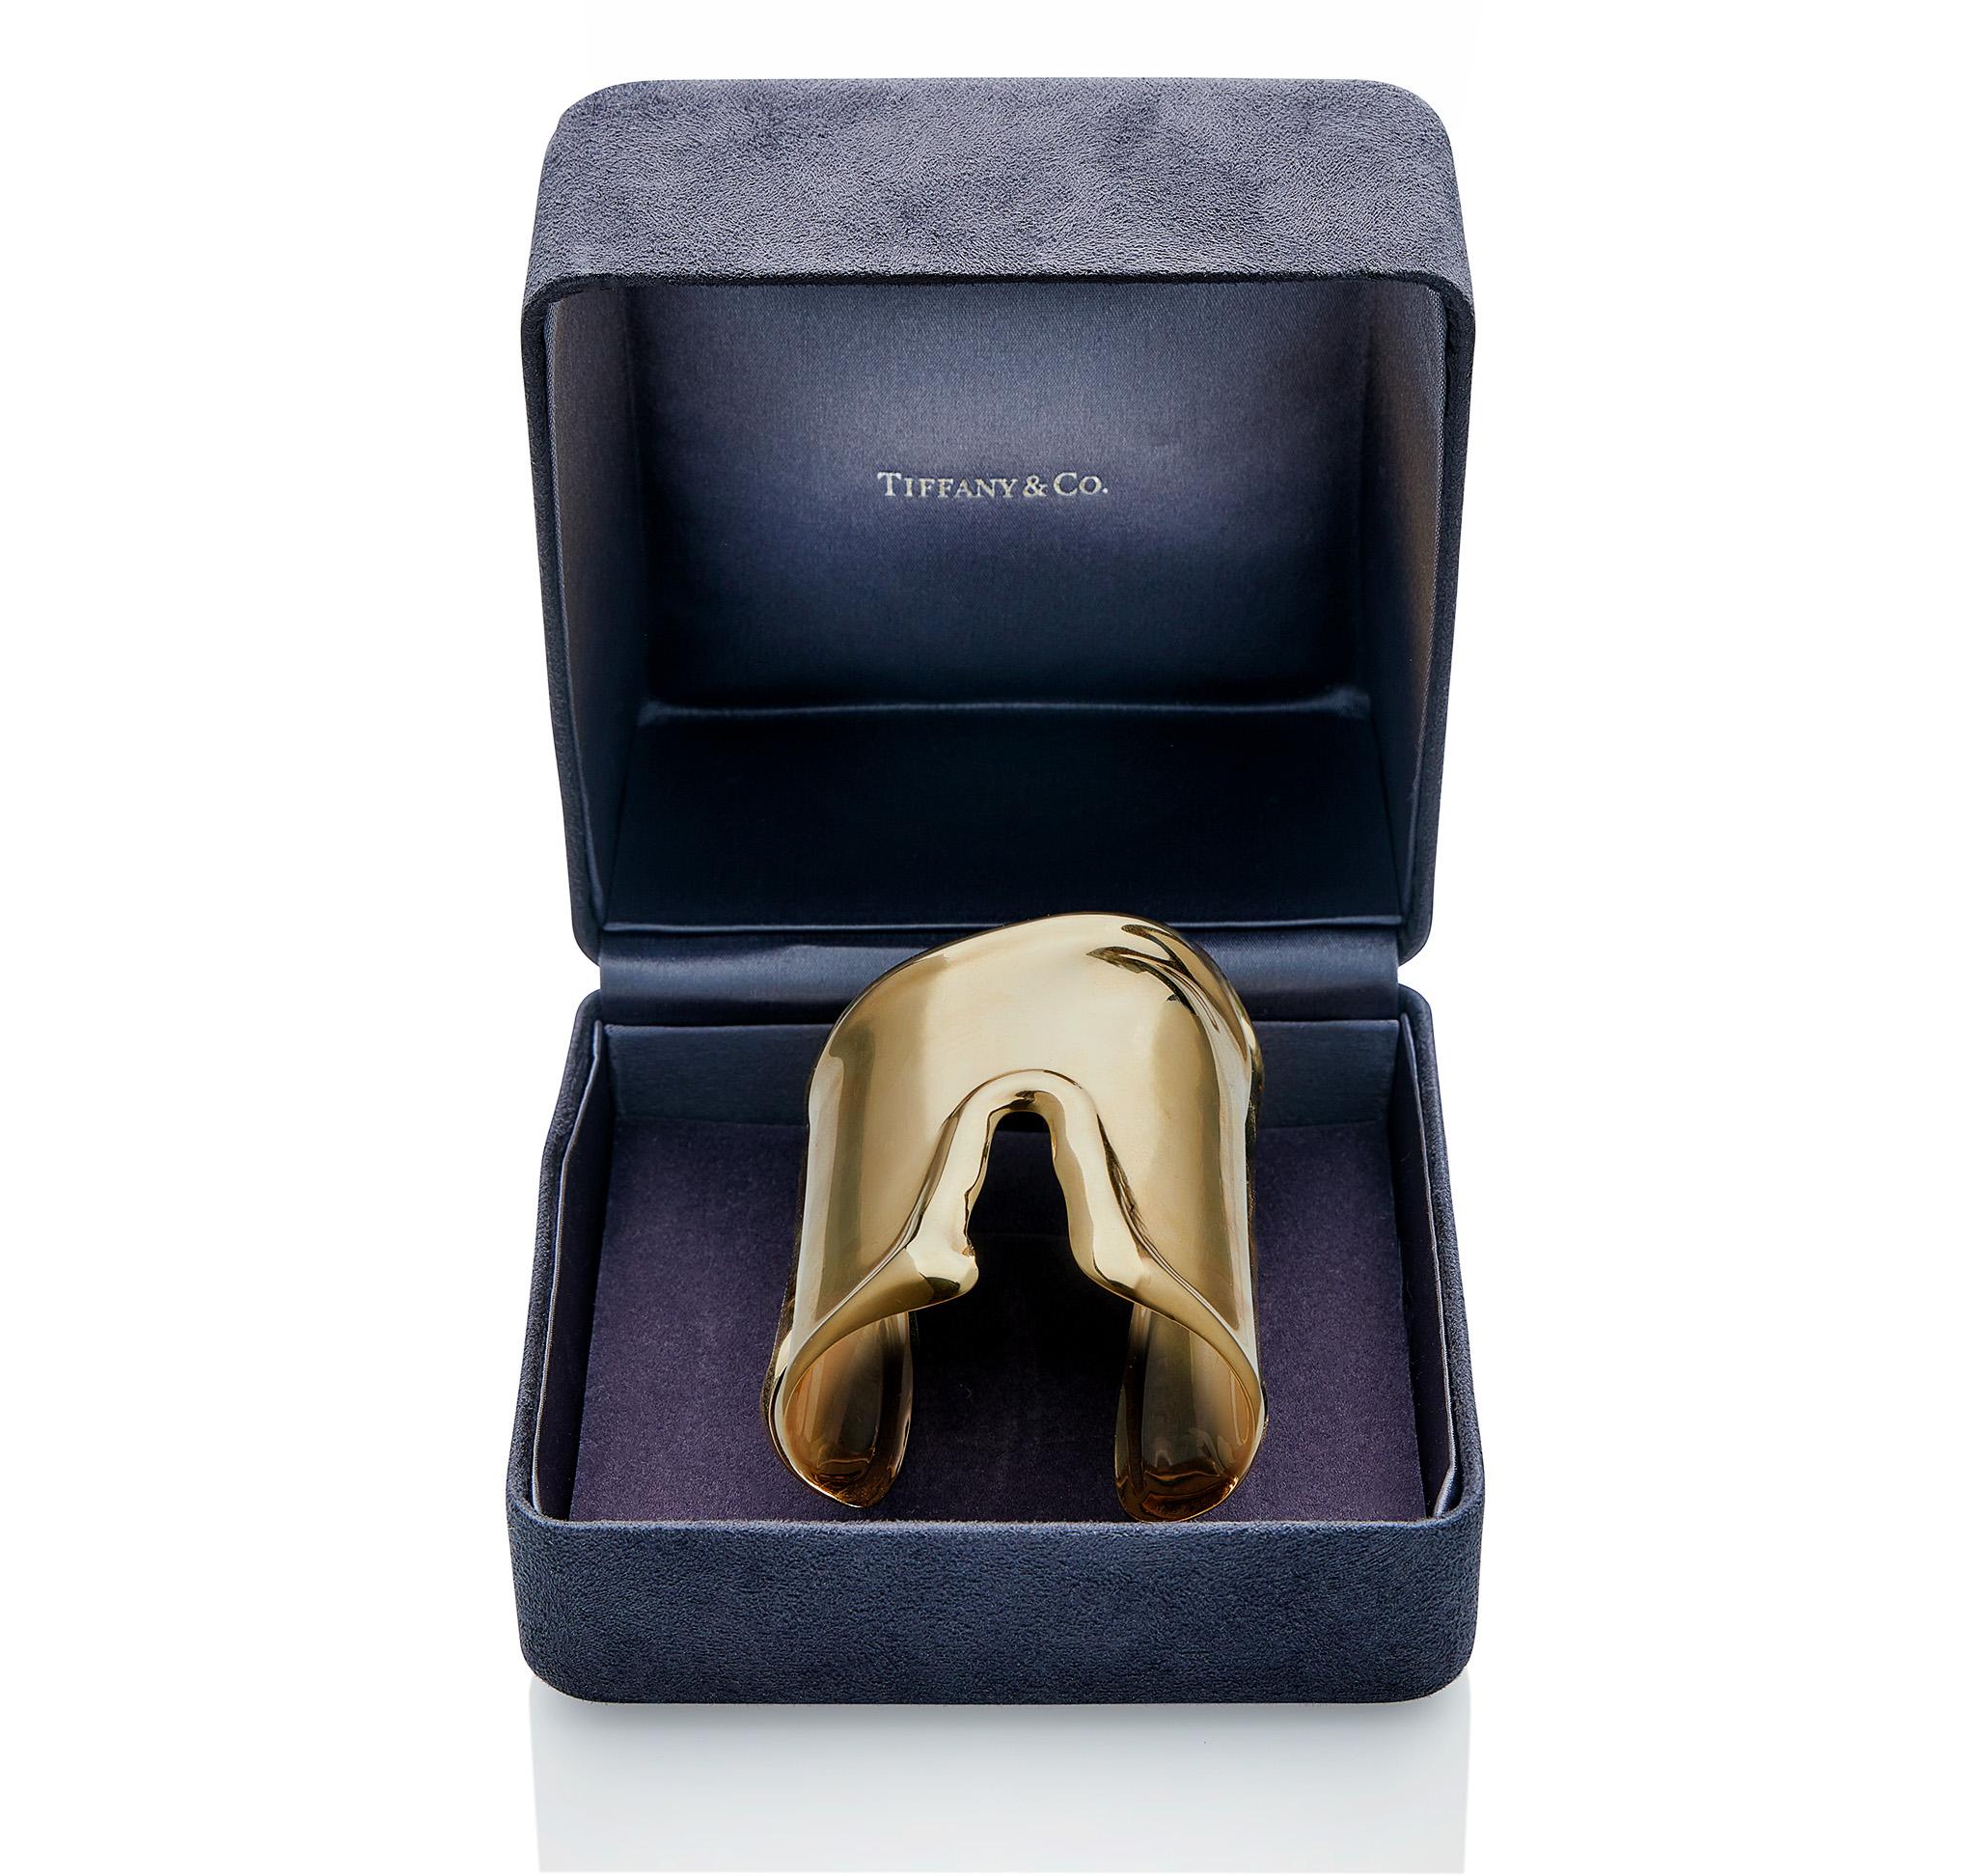 This Elsa Peretti for Tiffany & Co. large bone cuff bracelet, the large design of longer form, is composed of 18K gold. Anatomical in style, with raised edges, the cuff reflects the natural contours of the underlying wrist bone. A contemporary